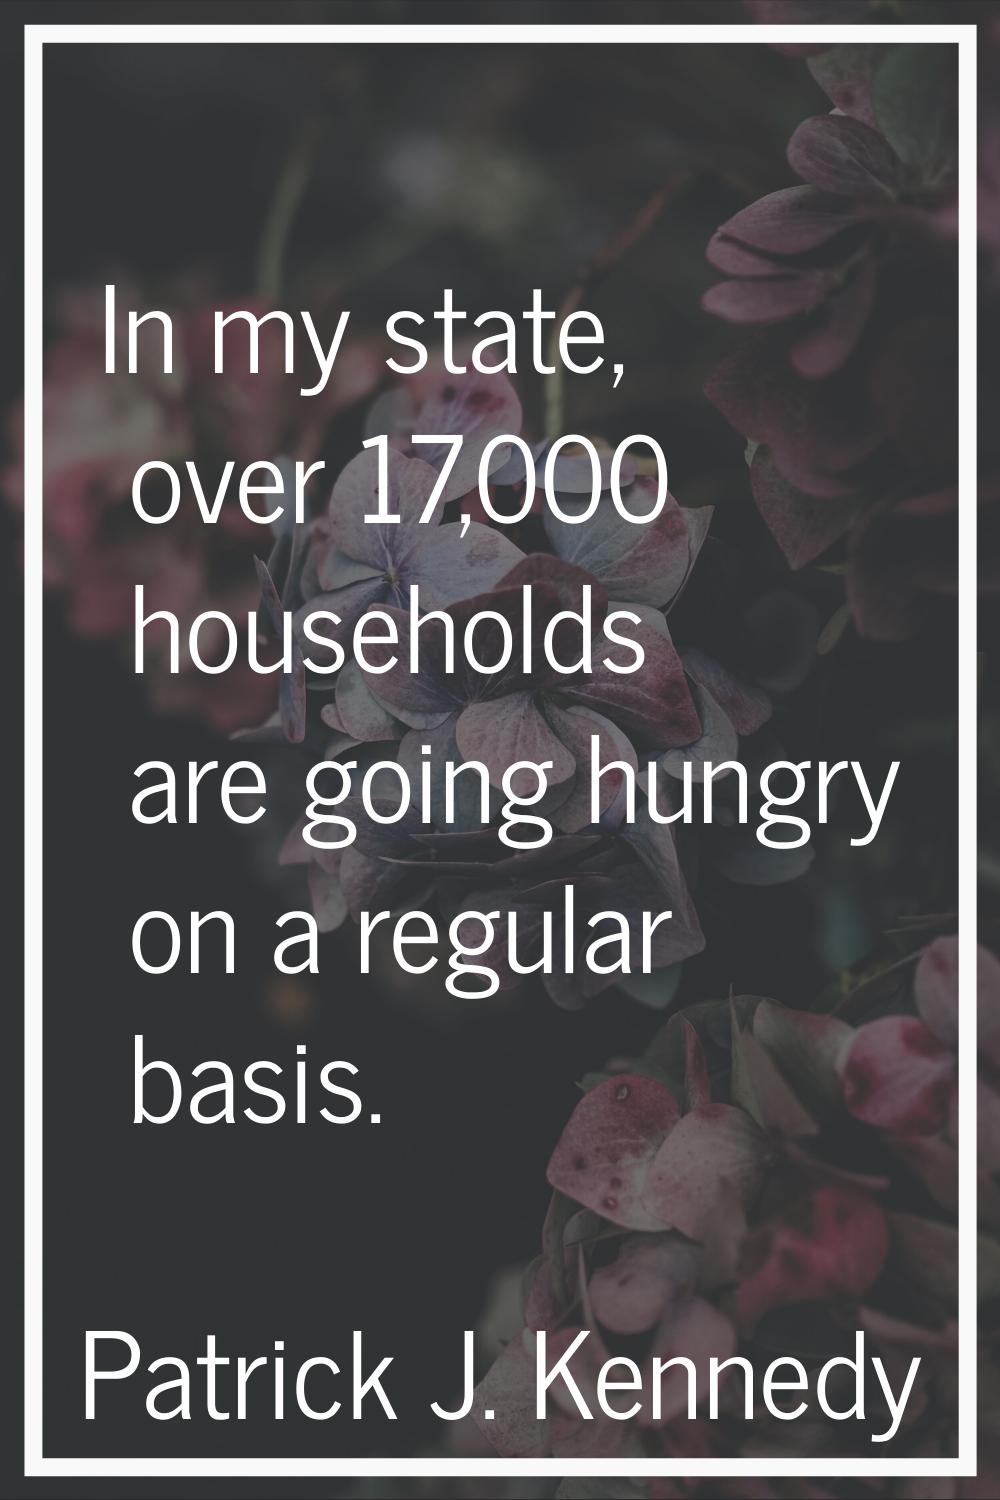 In my state, over 17,000 households are going hungry on a regular basis.